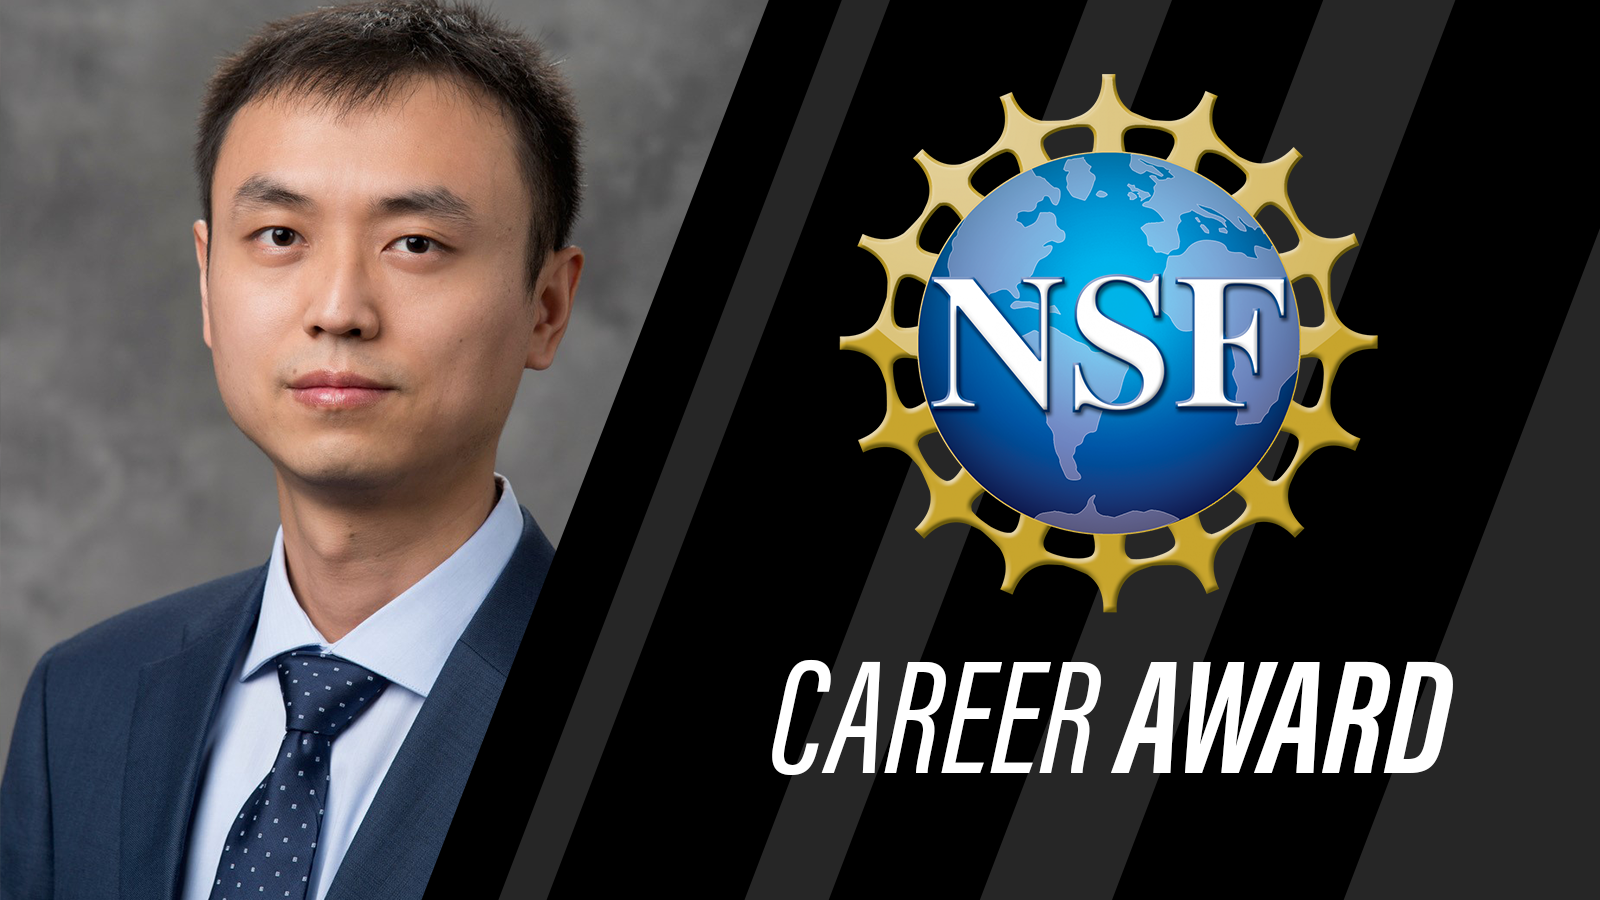 Wenhai Sun became a faculty member in Purdue Polytechnic's Department of Computer and Information Technology in 2019. (Courtesy: NSF logo)